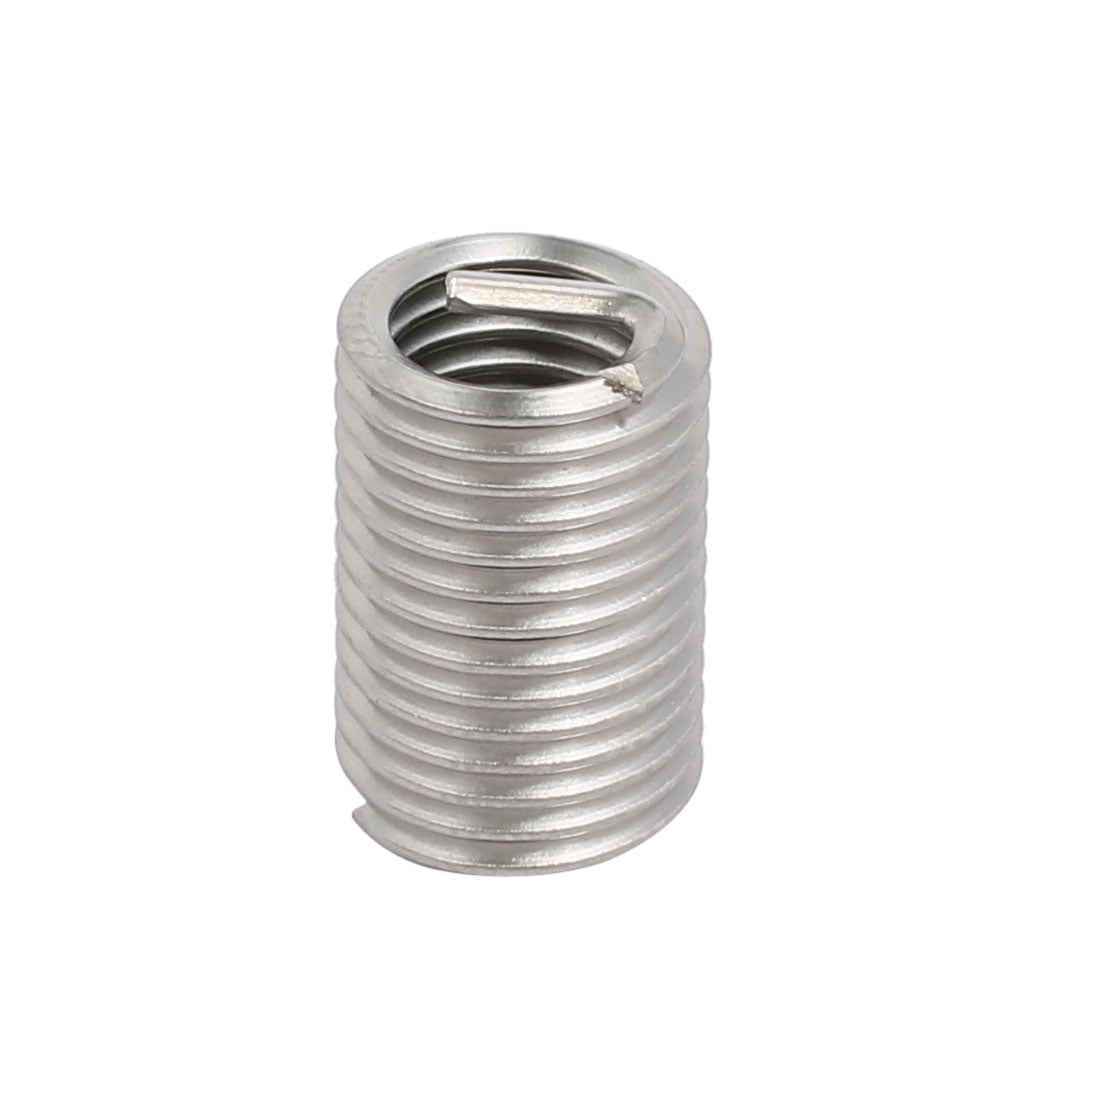 M8x1.25mmx12mm 304 Stainless Steel Helical Coil Wire Thread Insert 25pcs 